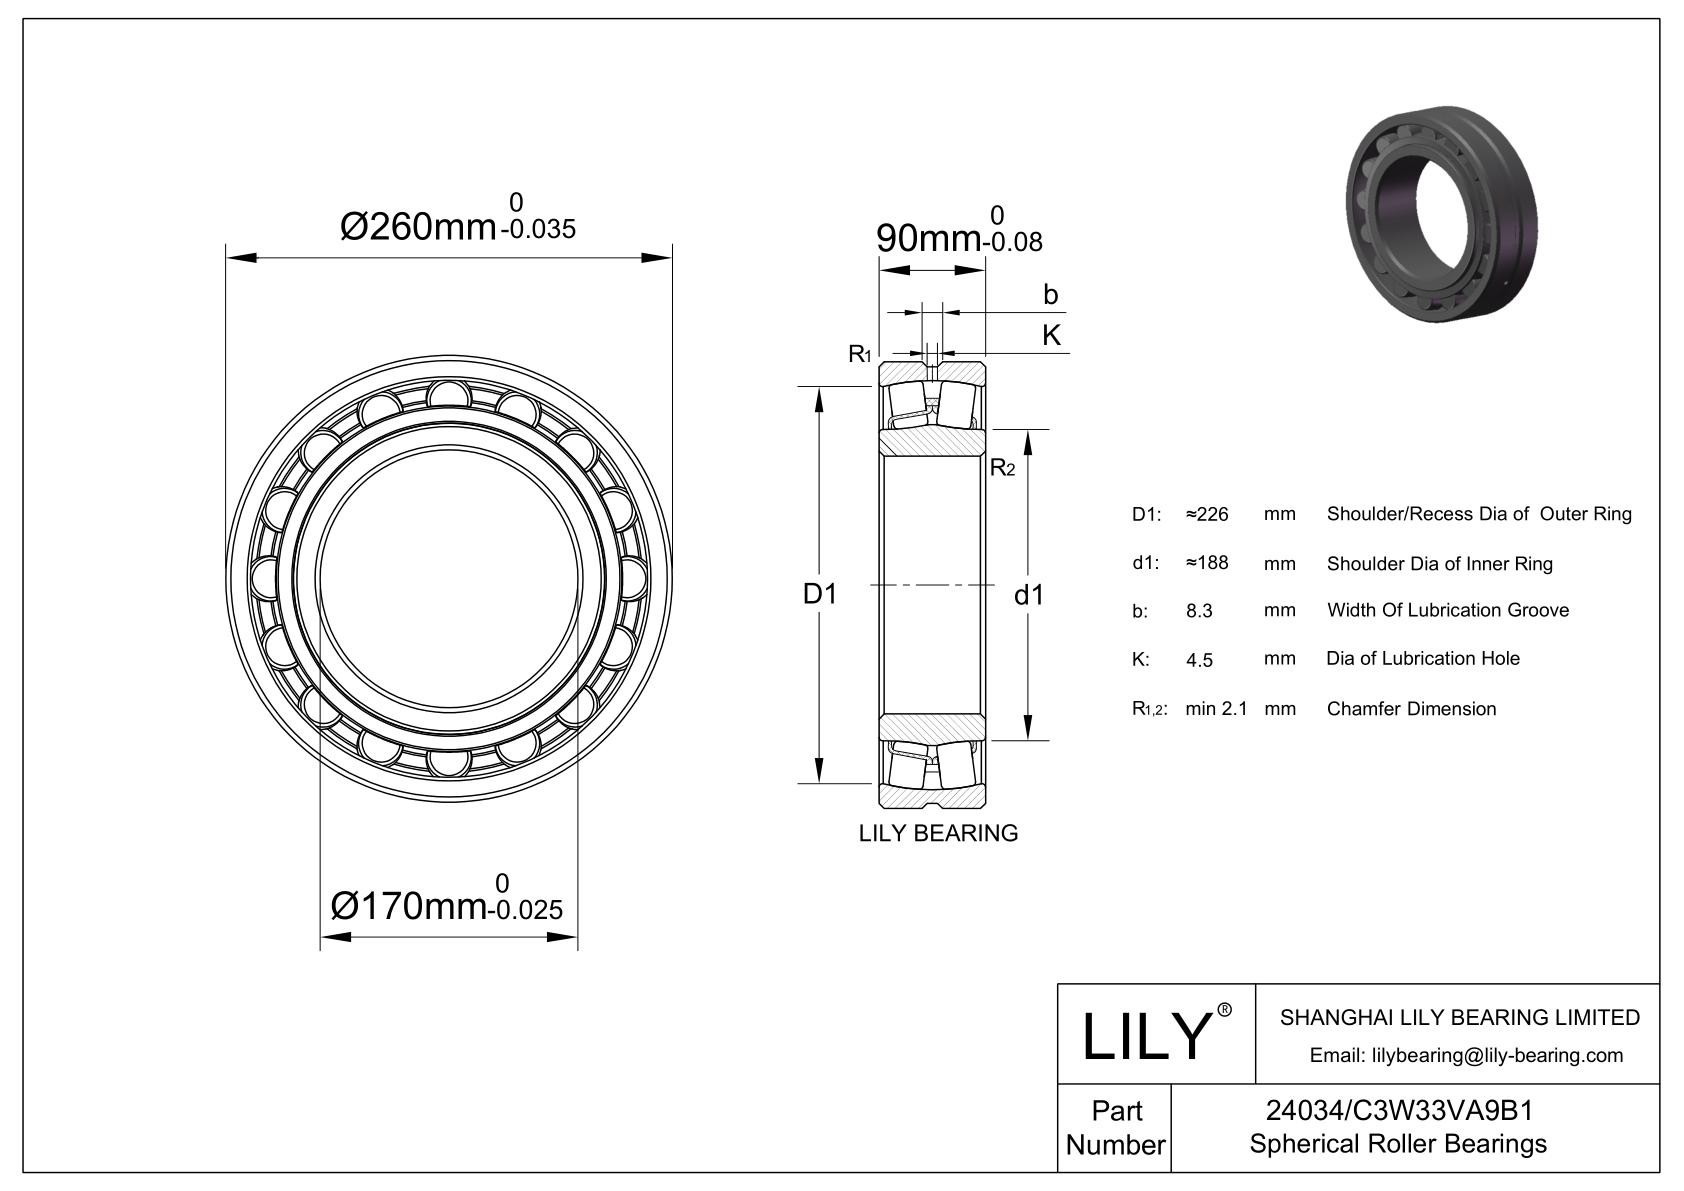 24034/C3W33VA9B1 Double Row Spherical Roller Bearing cad drawing